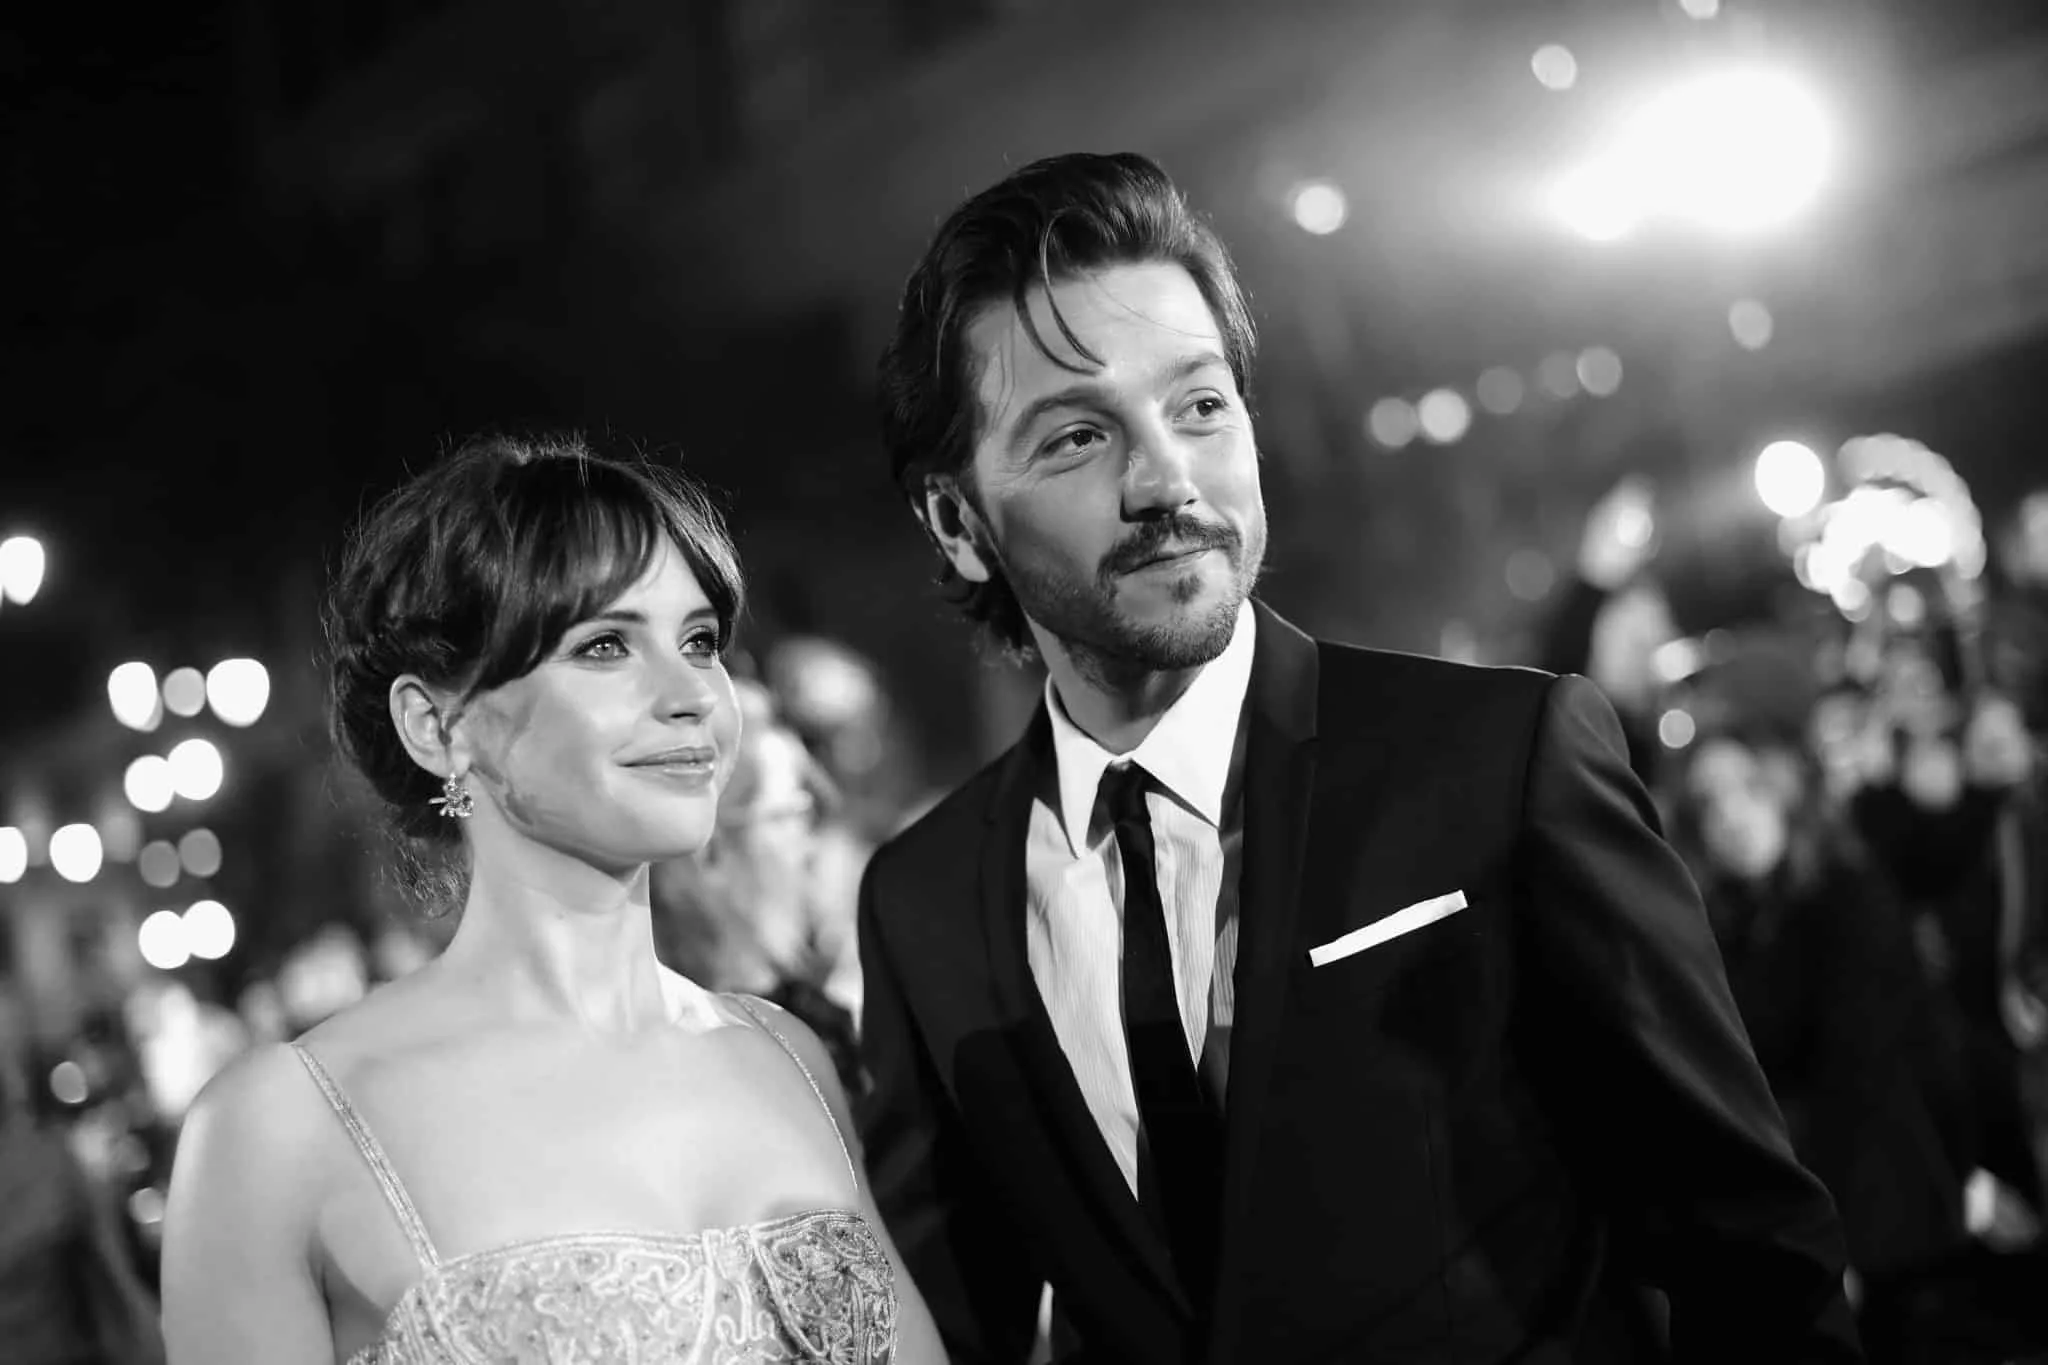 HOLLYWOOD, CA - DECEMBER 10:  (EDITORS NOTE: Image has been shot in black and white. Color version not available.)  Actors Felicity Jones (L) and Diego Luna attend The World Premiere of Lucasfilm's highly anticipated, first-ever, standalone Star Wars adventure, "Rogue One: A Star Wars Story" at the Pantages Theatre on December 10, 2016 in Hollywood, California.  (Photo by Charley Gallay/Getty Images for Disney) *** Local Caption *** Diego Luna; Felicity Jones